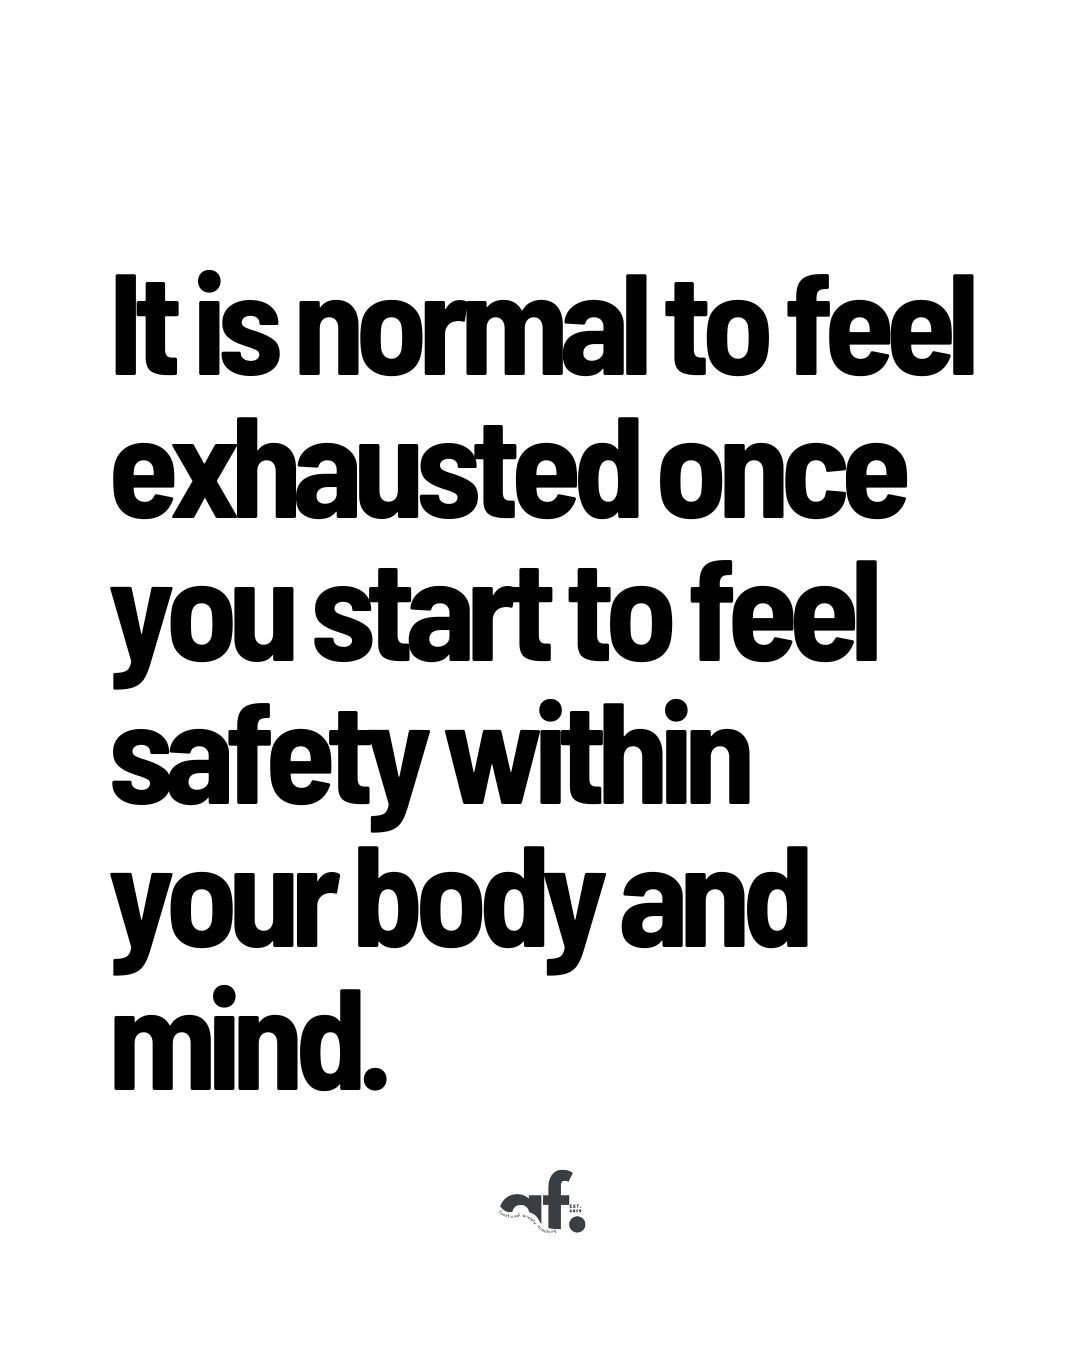 Ever wondered why you feel so tired when you finally start to feel safe within your body and mind?⁠
⁠
It&rsquo;s a normal response to winding down from constant hyperarousal&mdash;an adrenaline-fuelled state triggered by anxiety, stress, &amp; trauma